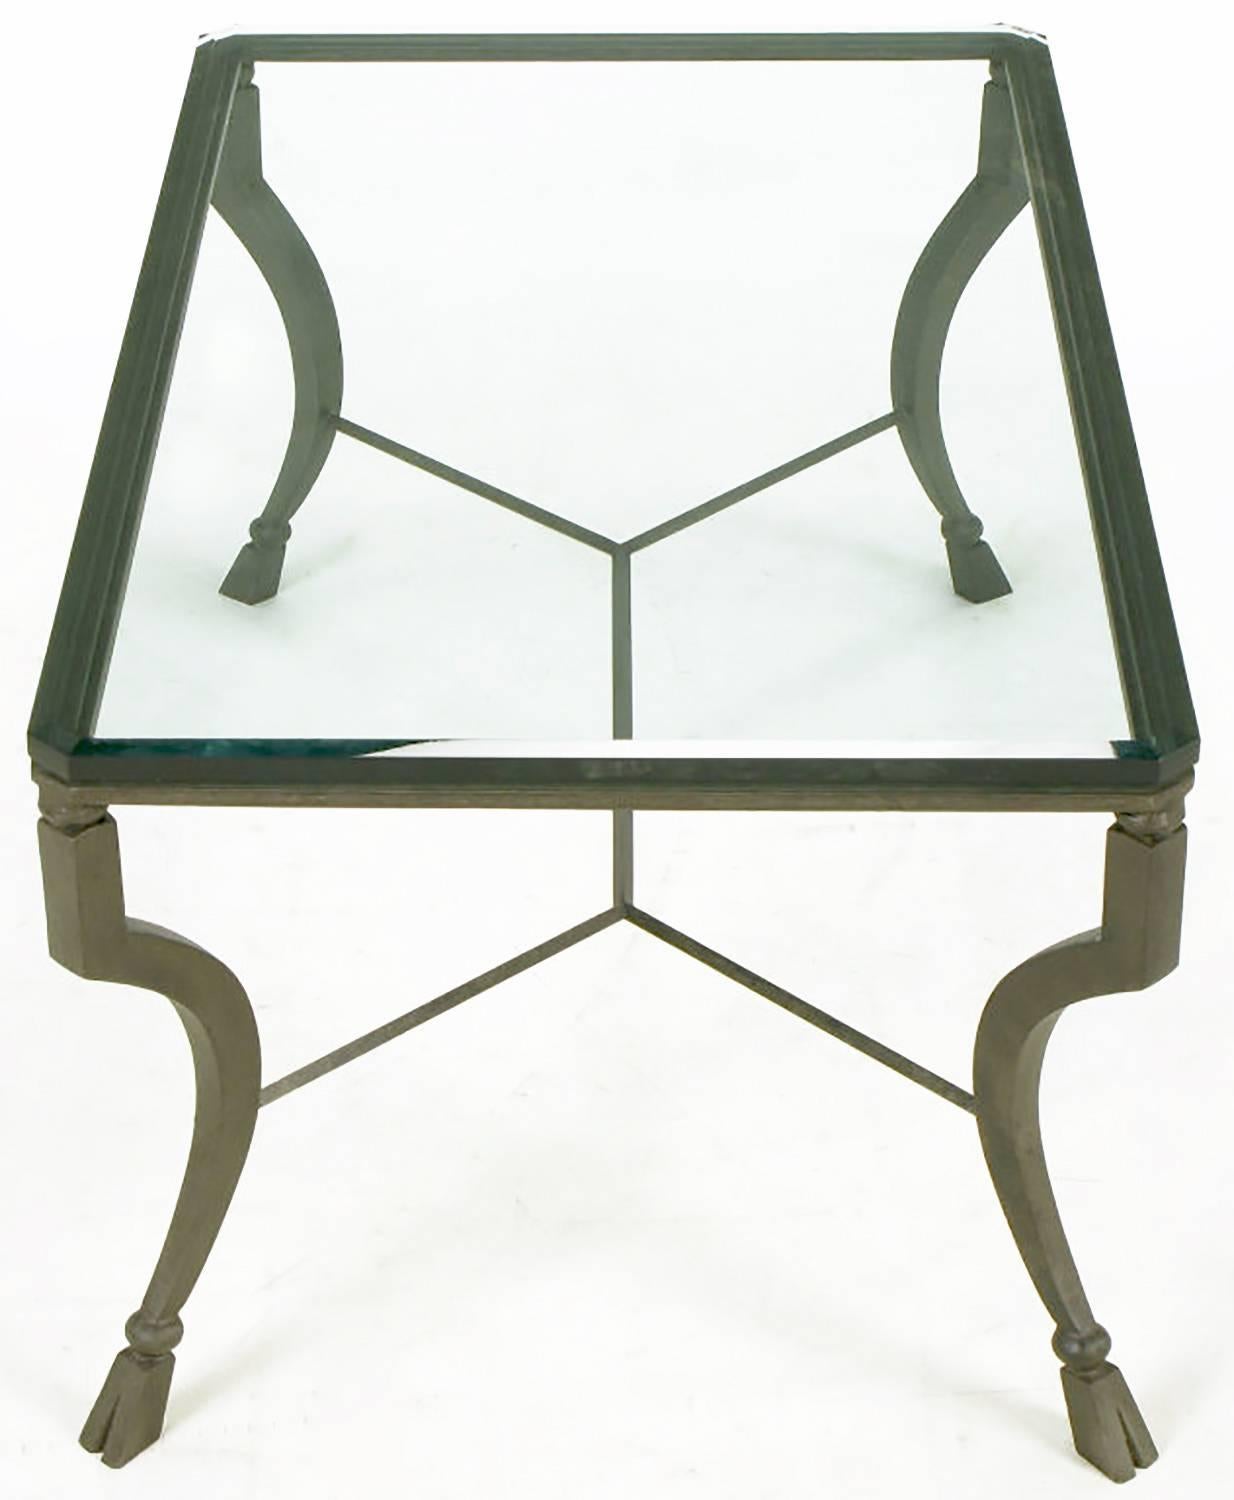 Late 20th Century Hand-Wrought Iron Stylized Hoof Foot Coffee Table in Gunmetal Grey Finish For Sale